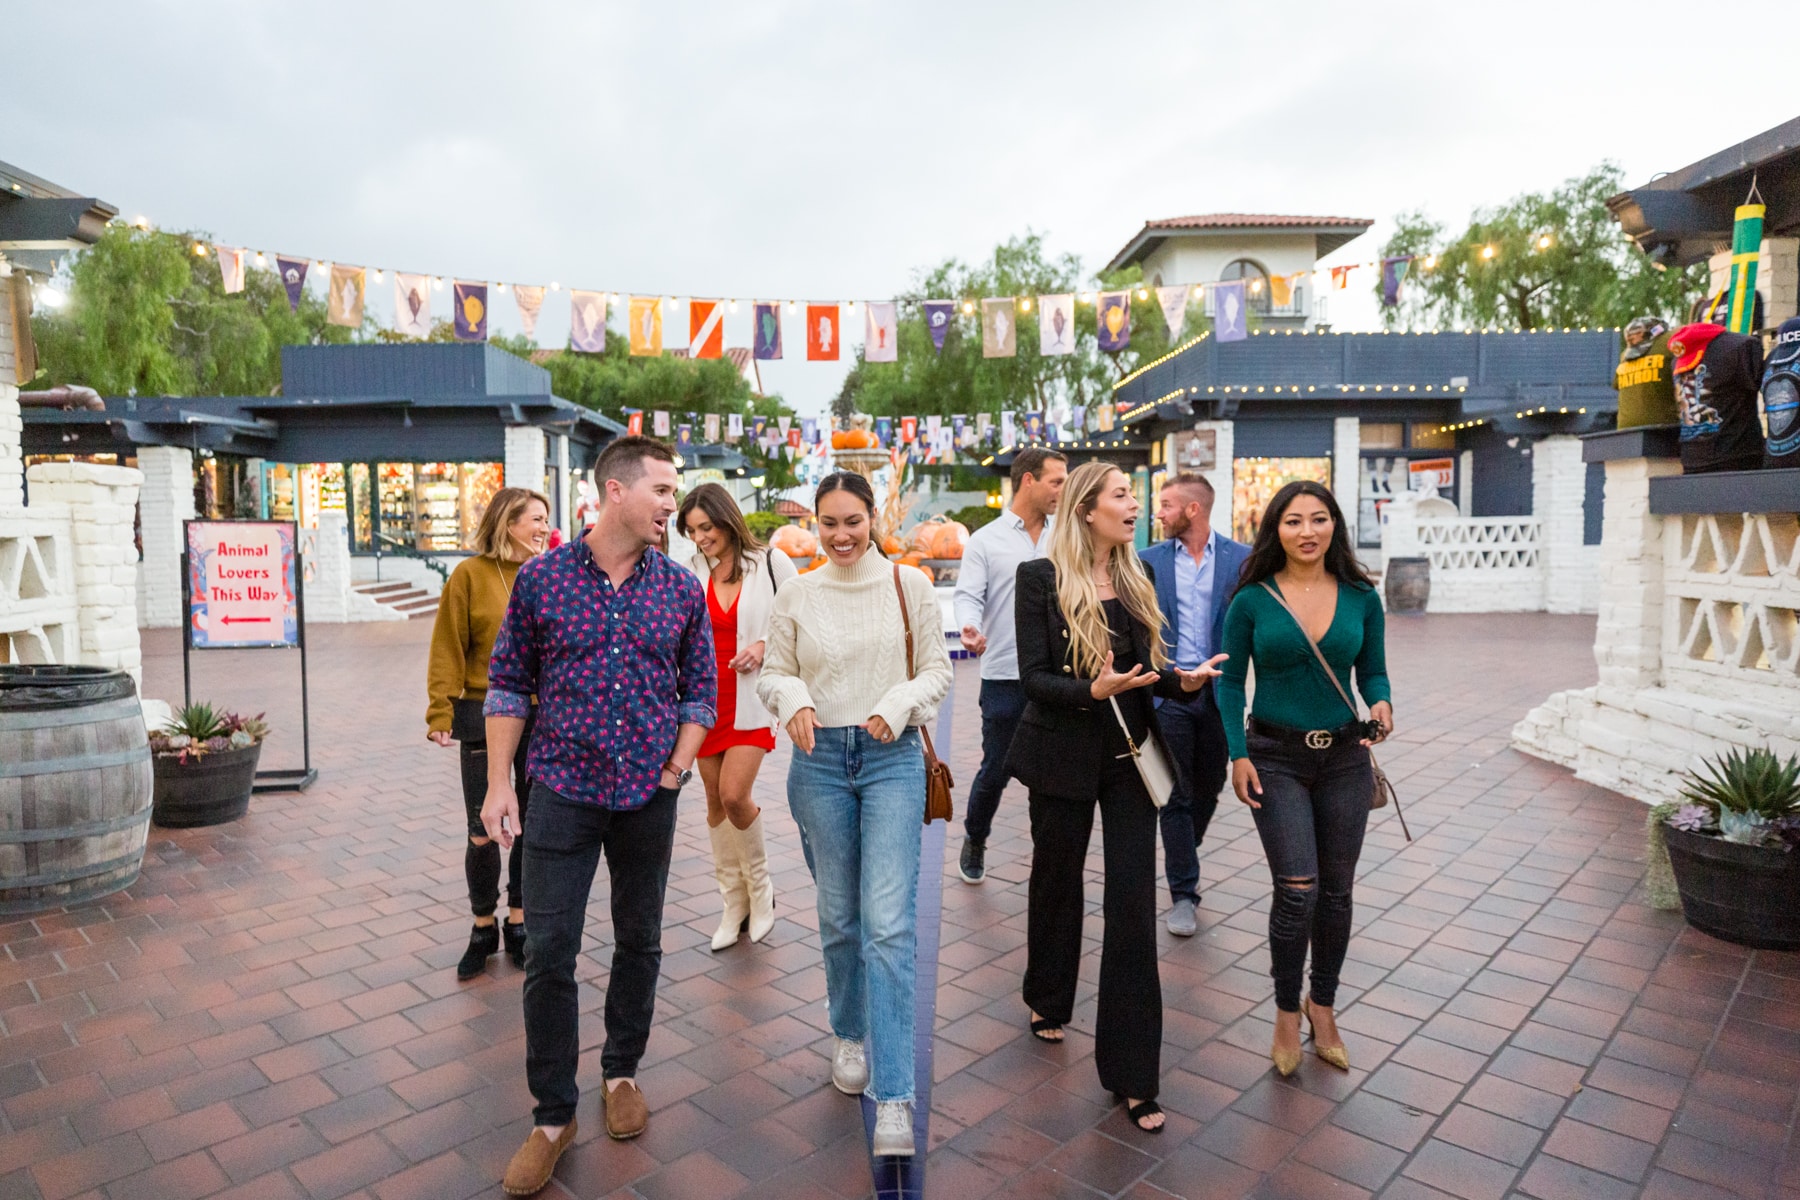 5 Reasons to Try a Local San Diego Walking Tour